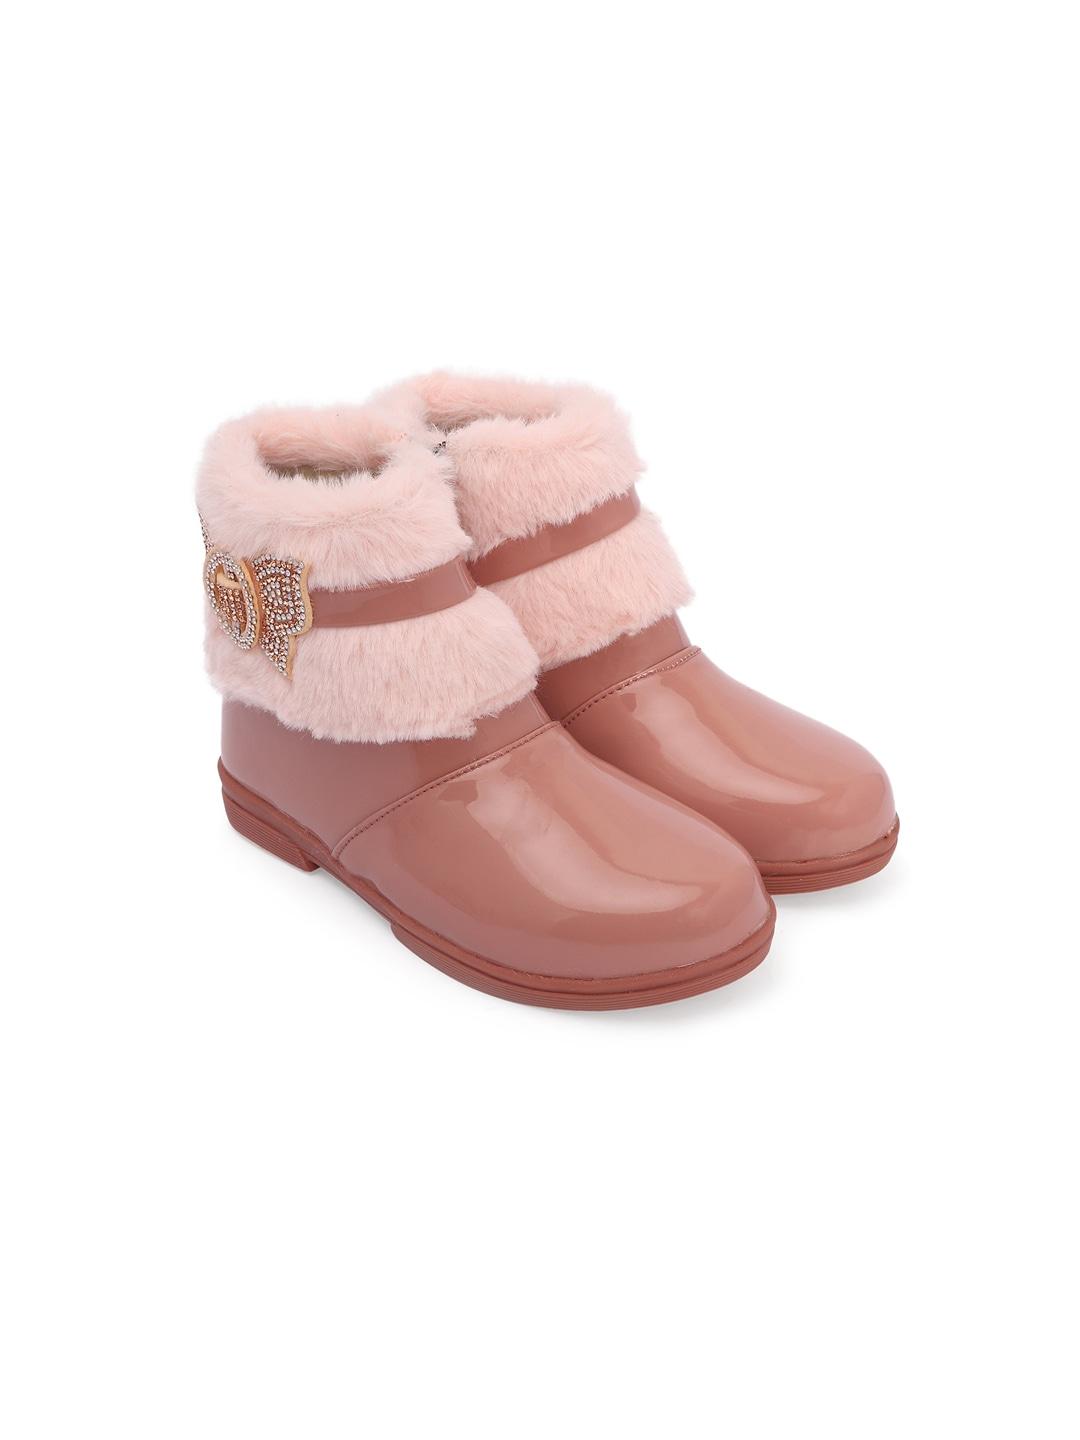 baesd-girls-bow-detailed-winter-boots